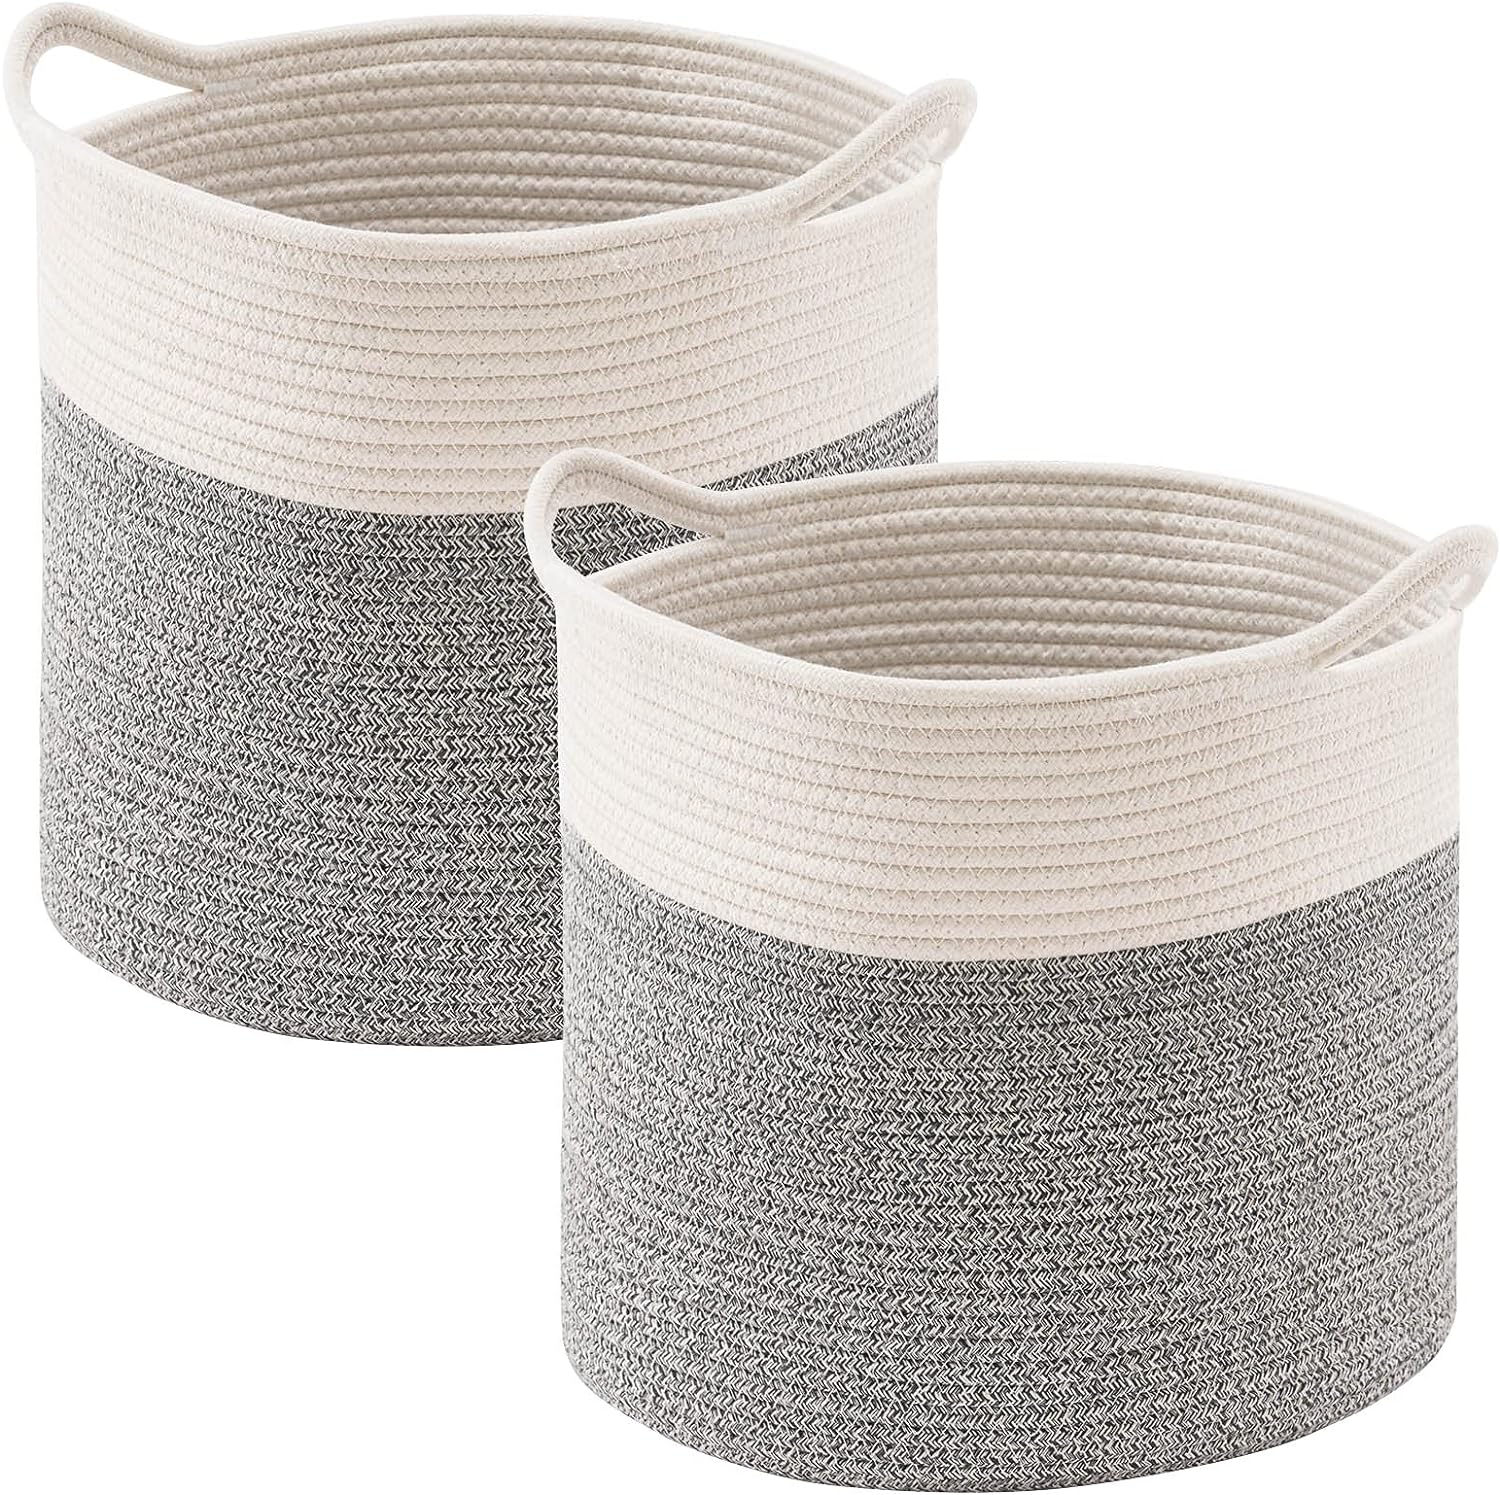 YOUDENOVA Cotton Rope Cube Storage Baskets, 13x13 Round Woven Baskets for Storage with Handles 2 Pack, Modern Decorative Storage Bins Dcor Baskets for 13 inch Cube Storage Shelves, Grey&Cream White